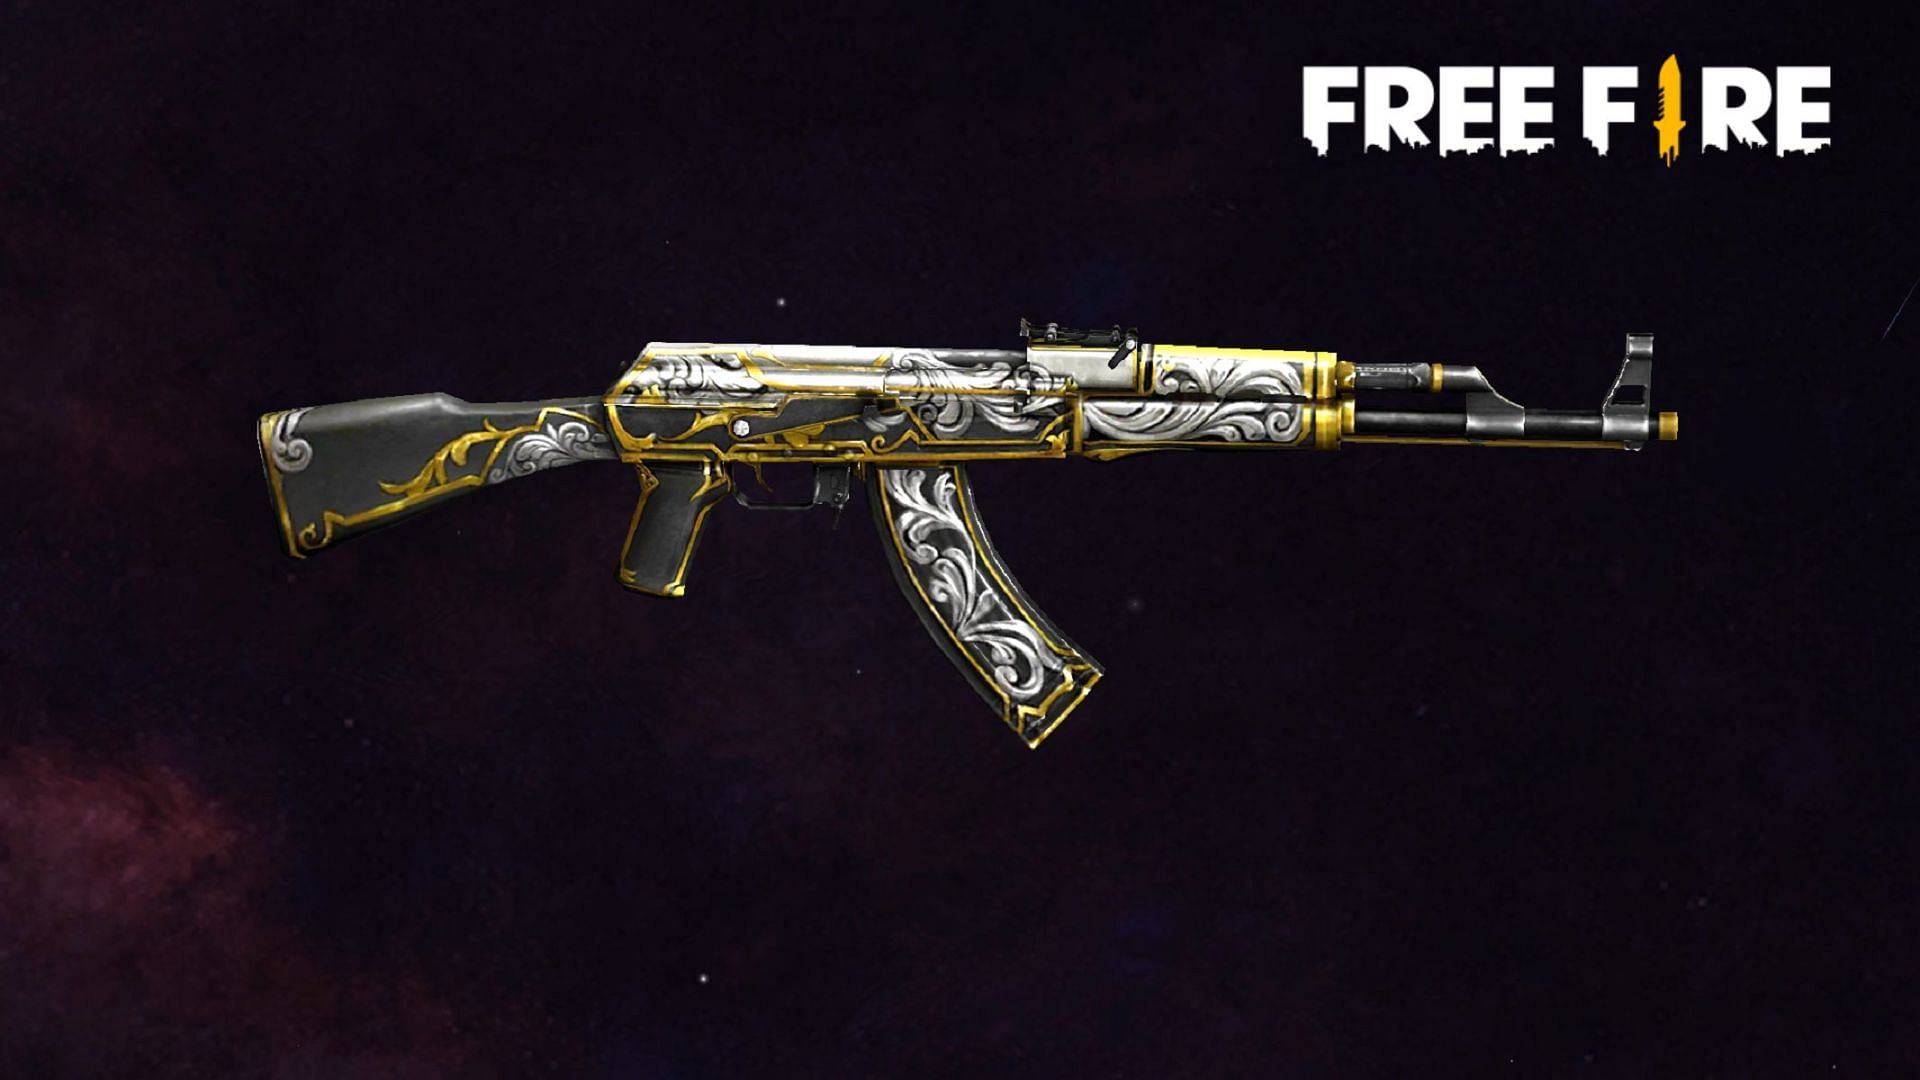 This gun skin is present in the loot crate of this redeem code (Image via Free Fire)